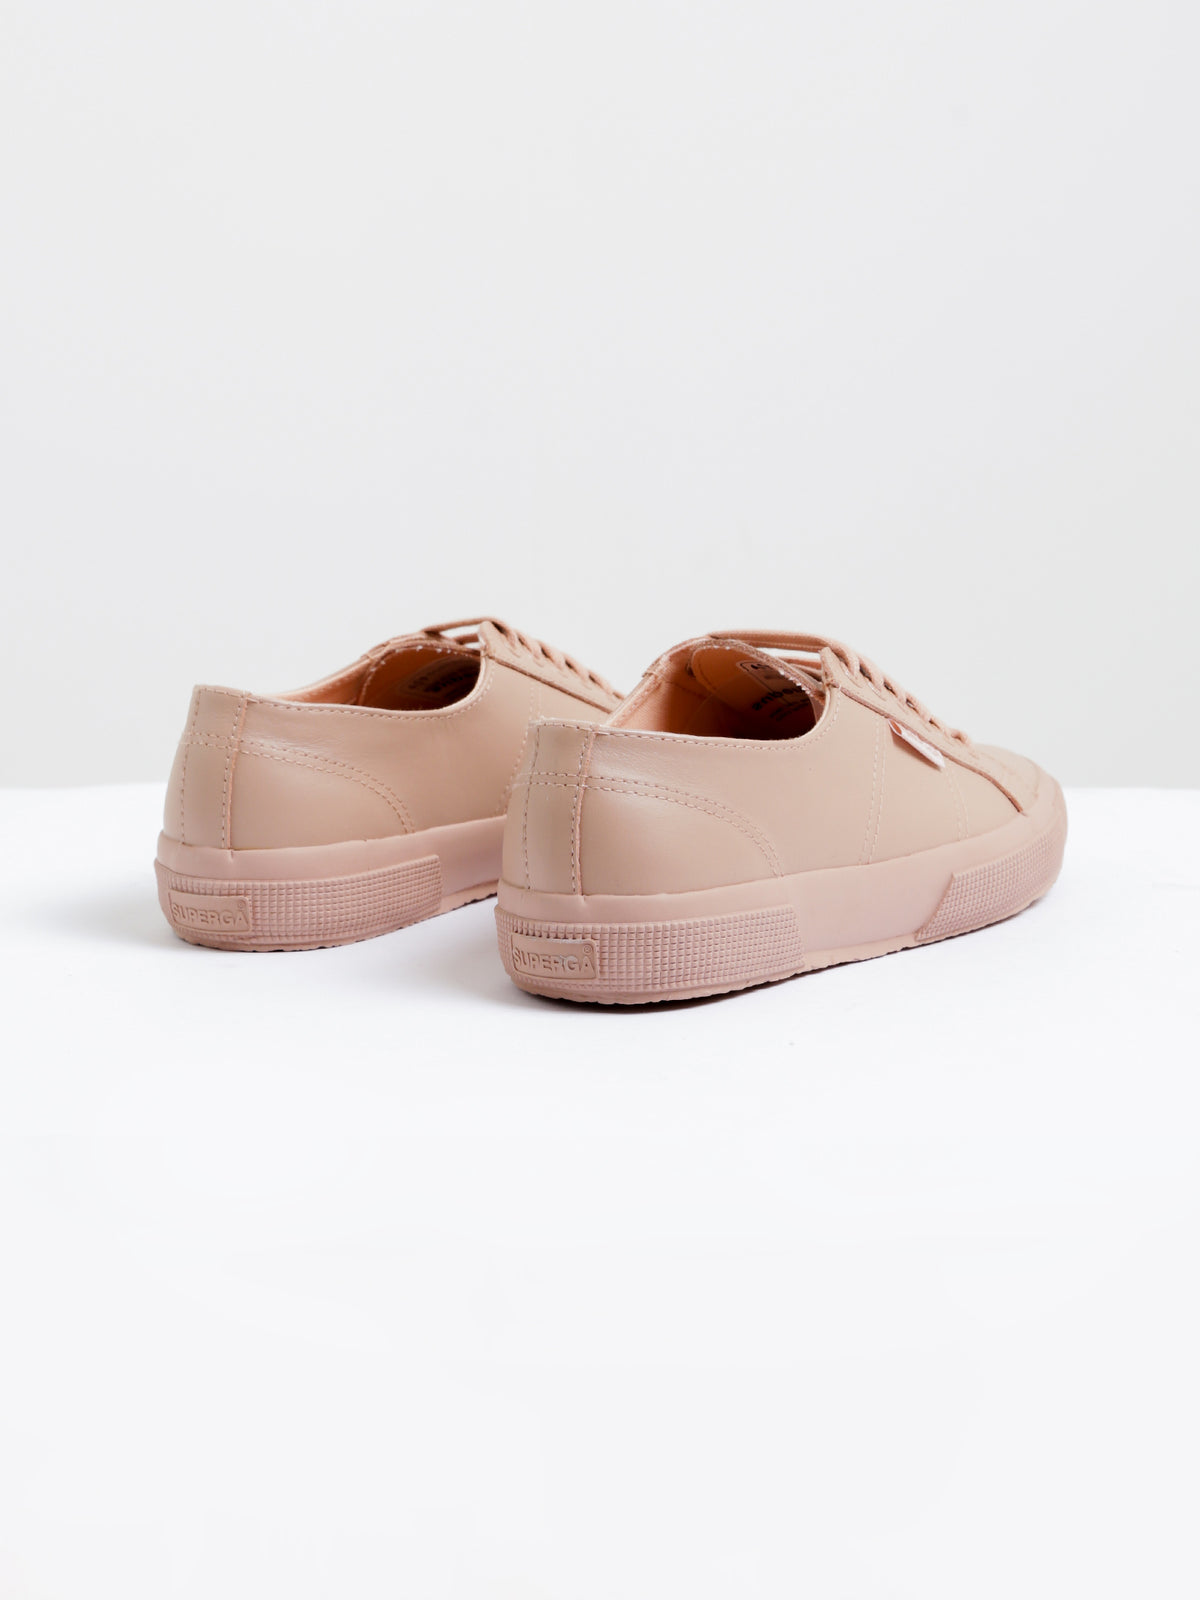 Womens 2750 FGLU Sneakers in Light Pink Leather